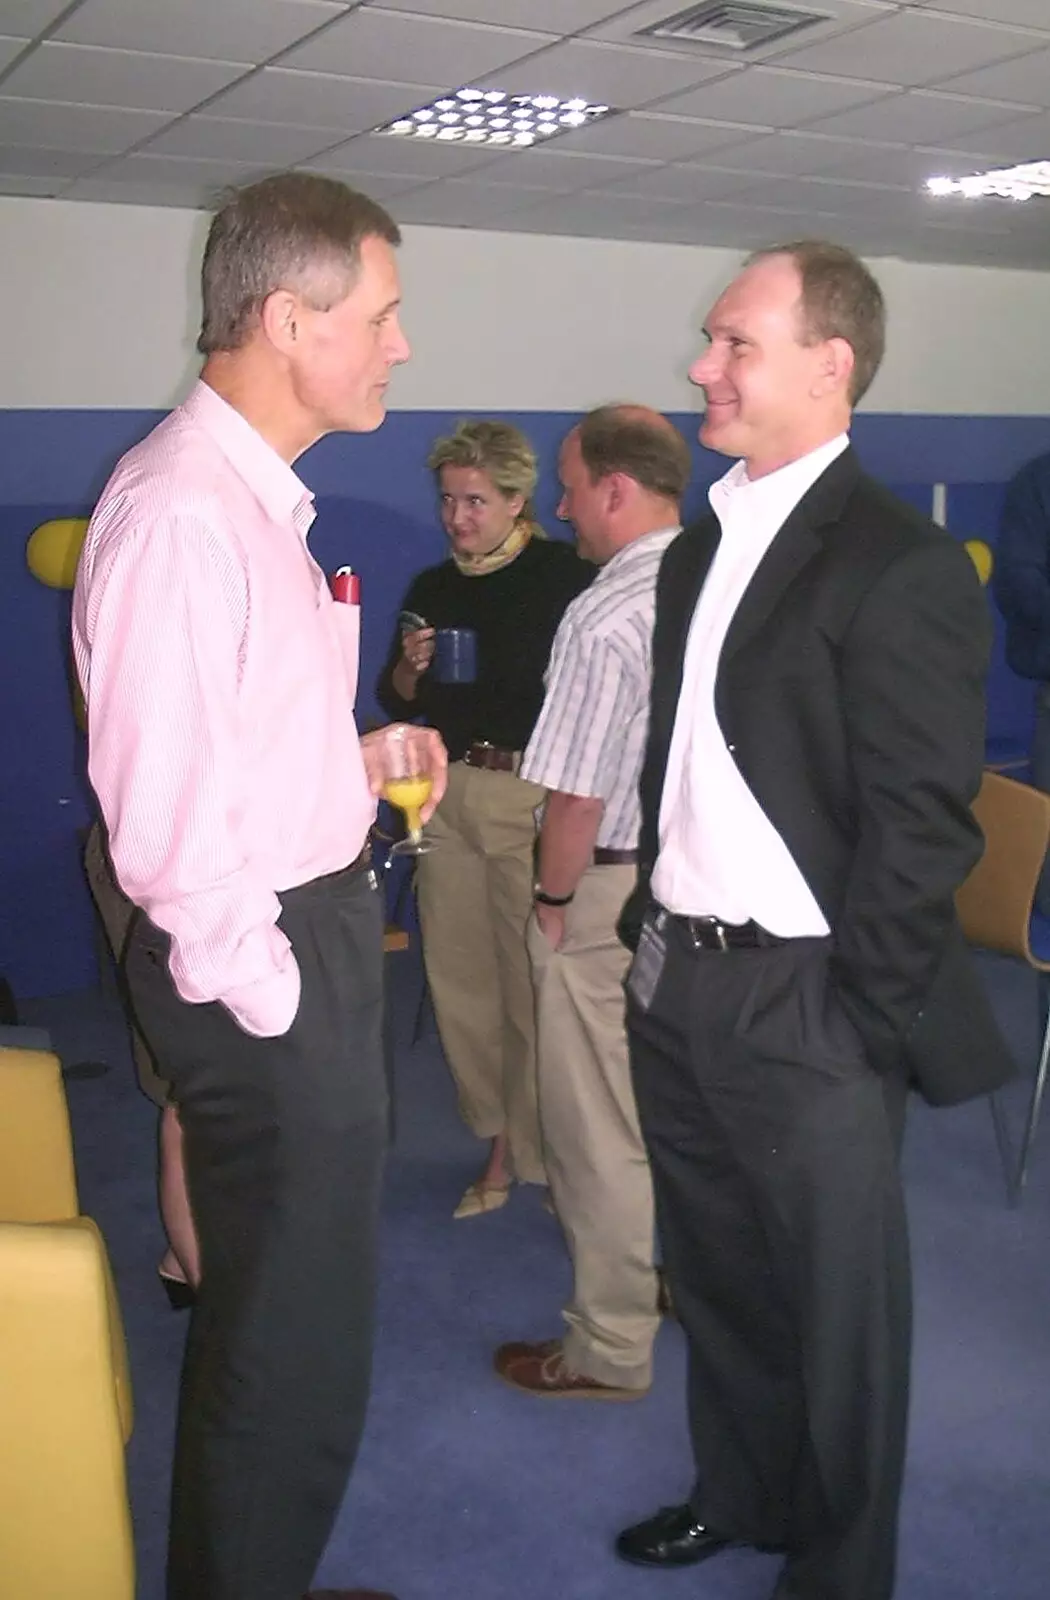 Tim Simpson chats to someone, from A Trip to Libertyville, Illinois, USA - 31st August 2004